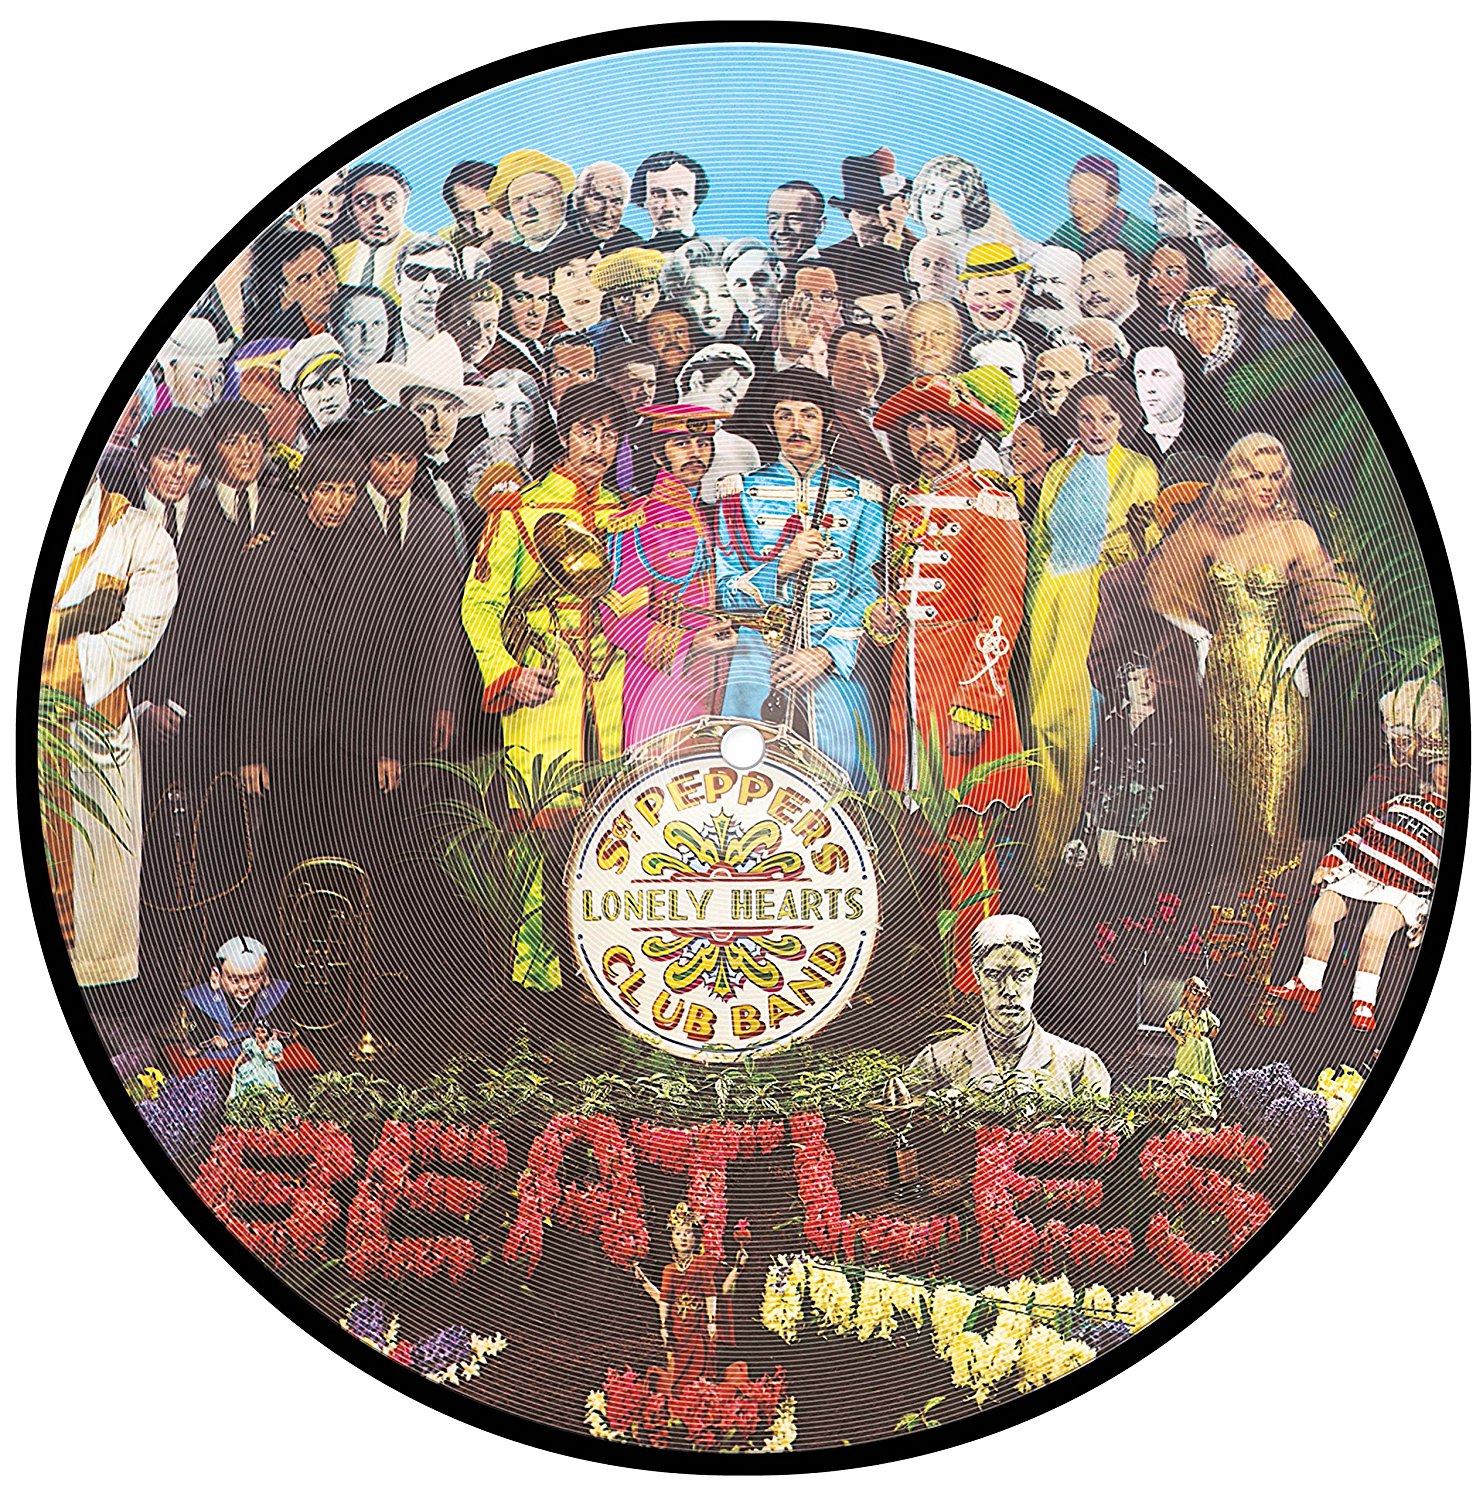 Beatles sgt peppers lonely hearts club. The Beatles Sgt. Pepper's Lonely Hearts Club Band 1967. The Beatles Sgt. Pepper's Lonely Hearts Club Band 2017. Sgt Pepper s Lonely Hearts Club Band. Битлз Sgt Pepper s Lonely Hearts Club Band.